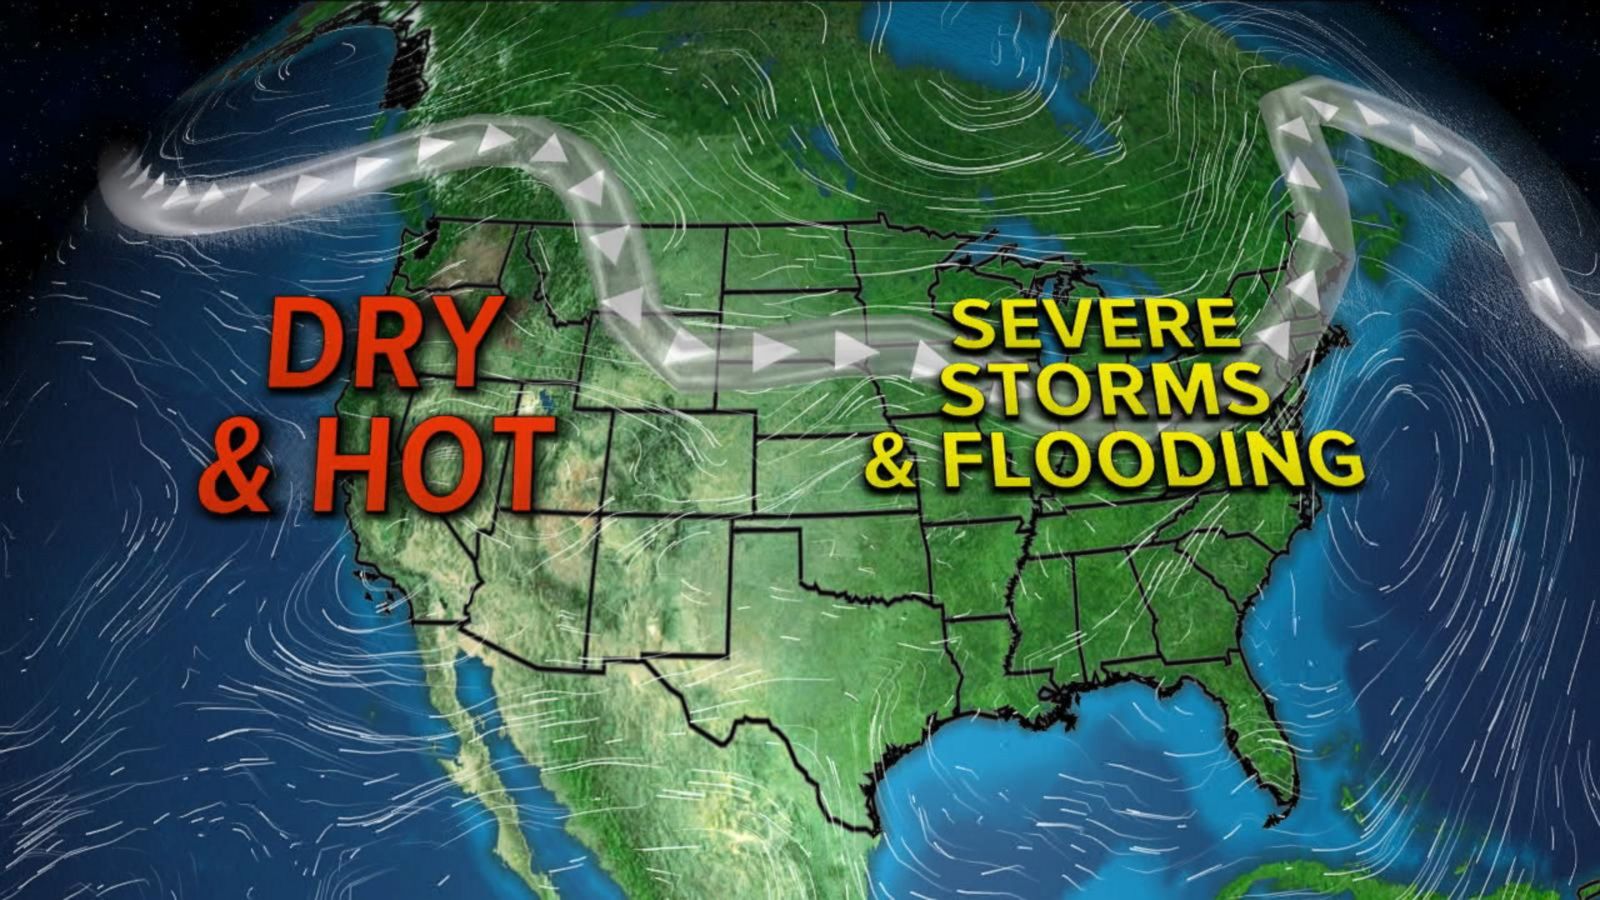 30 million people on alert for severe weather - Good Morning America